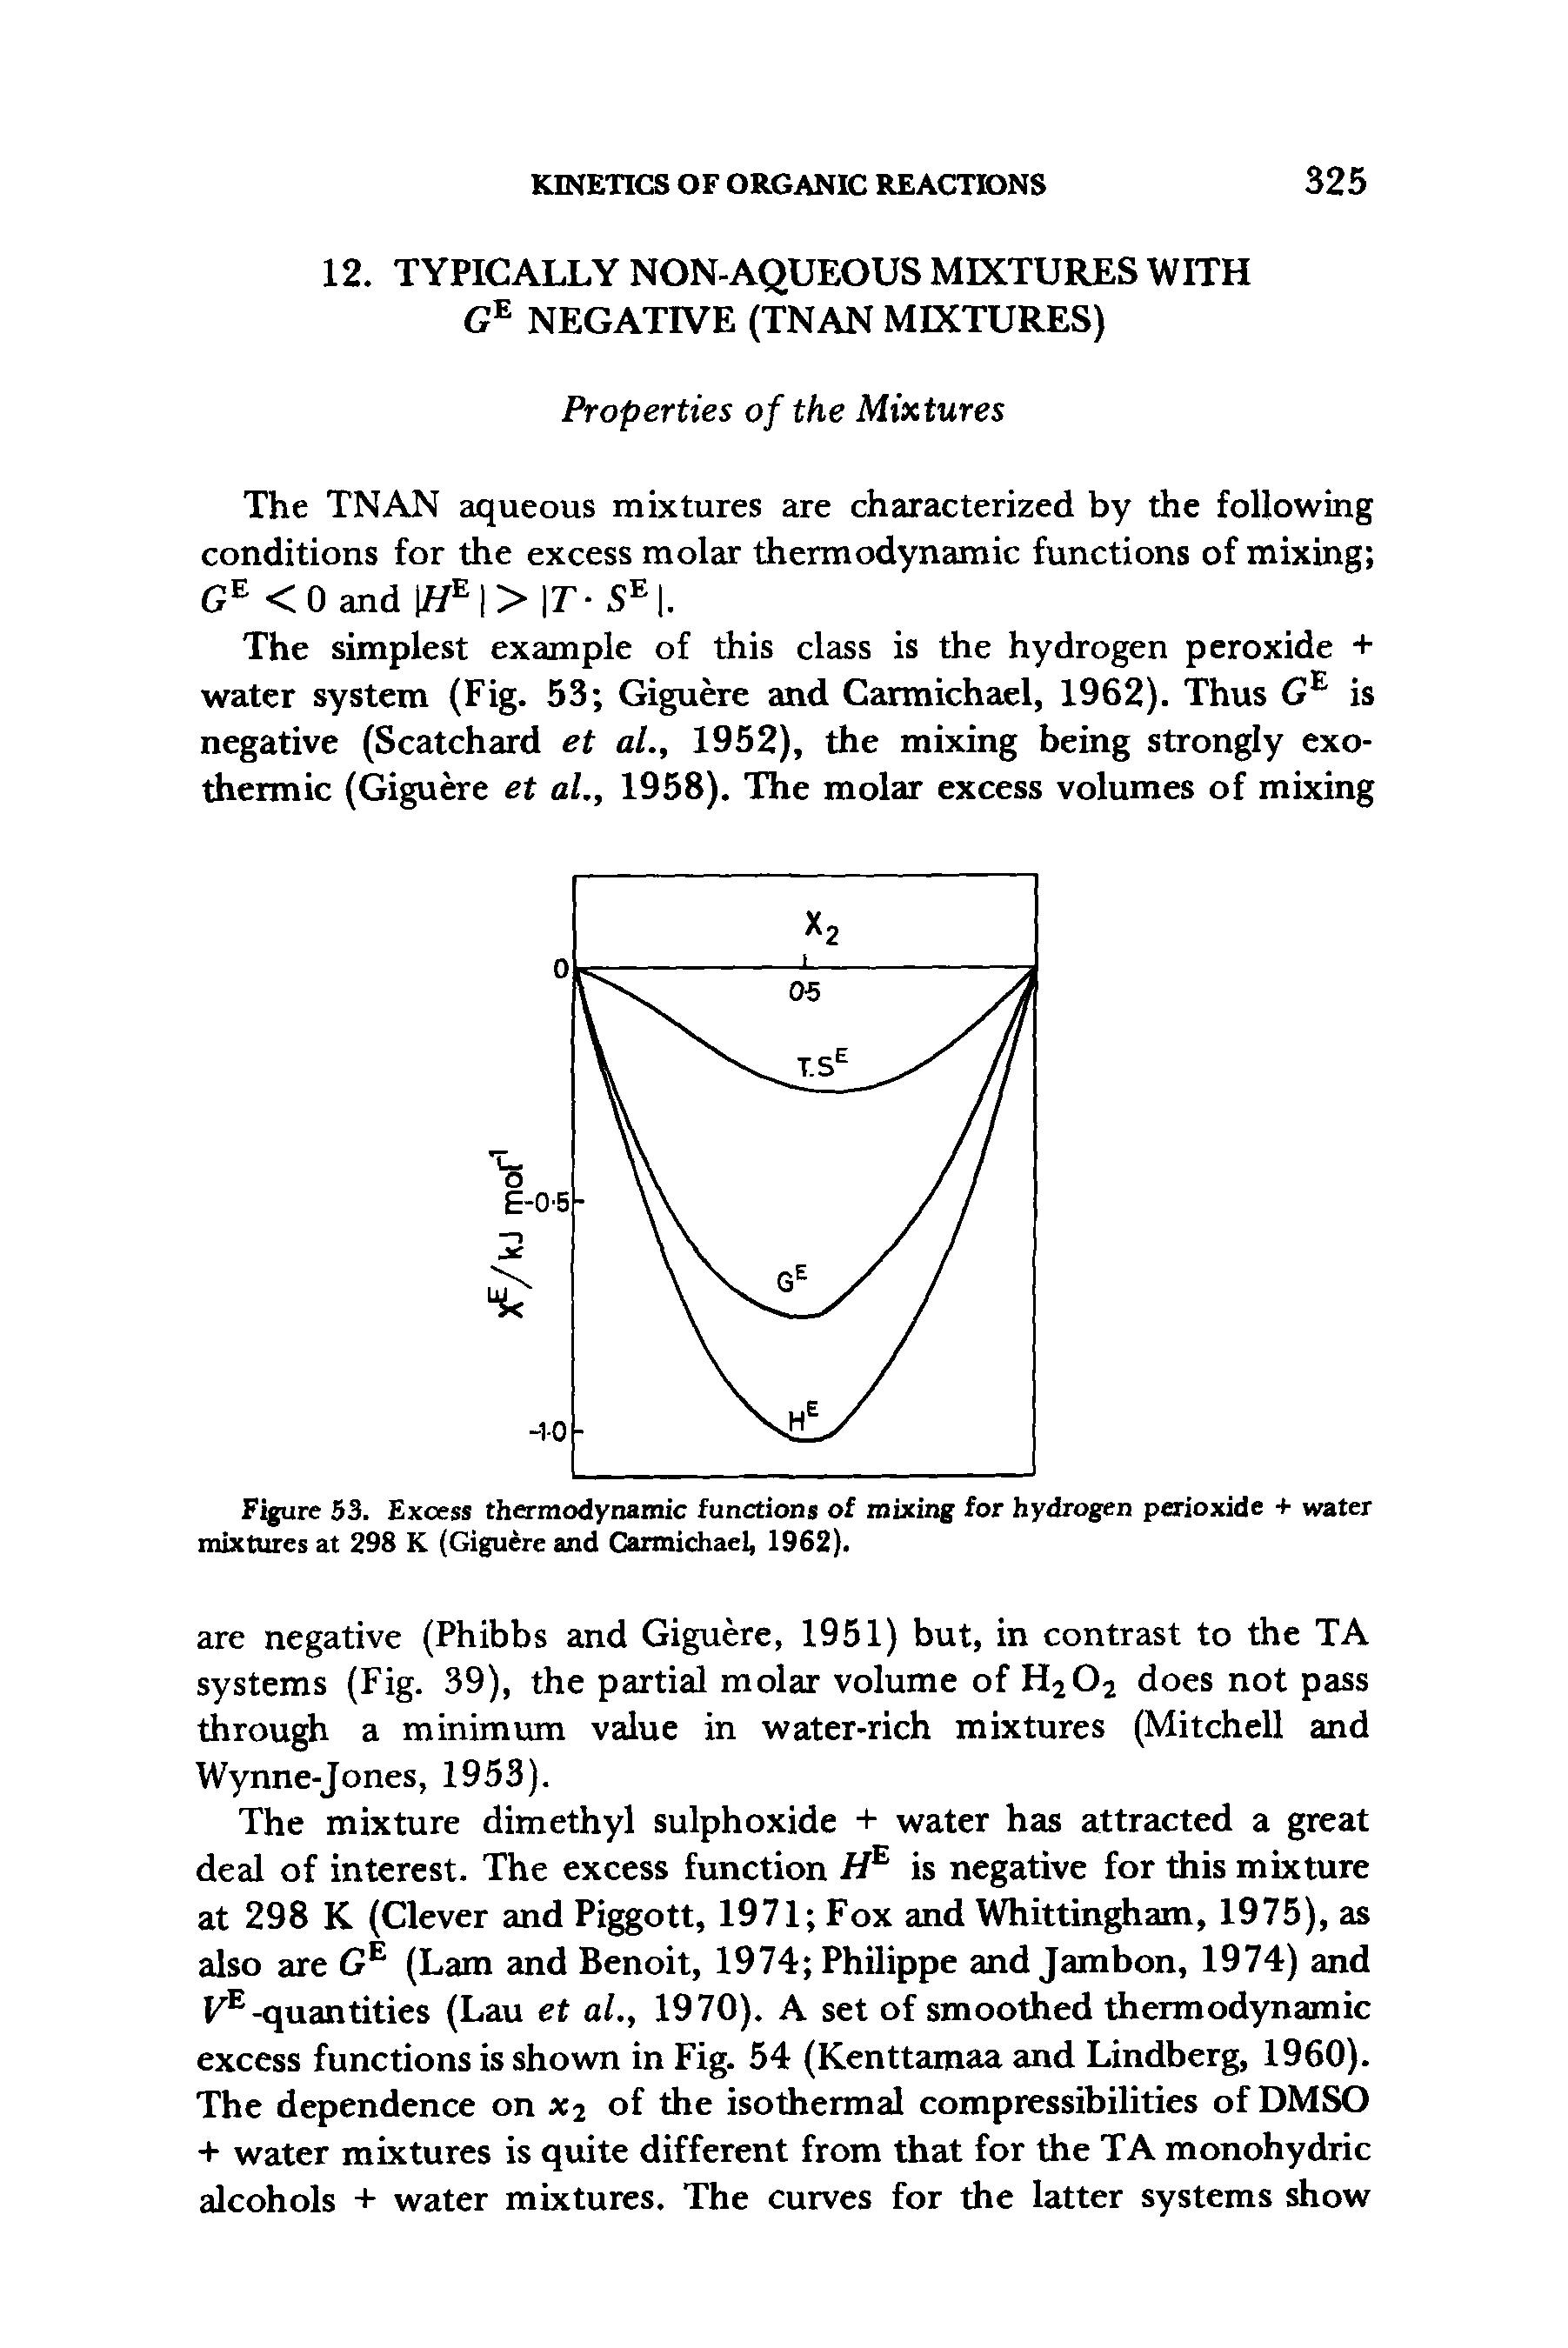 Figure 53. Excess thermodynamic functions of mixing for hydrogen perioxide + water mixtures at 298 K (Giguere and Carmichael, 1962).